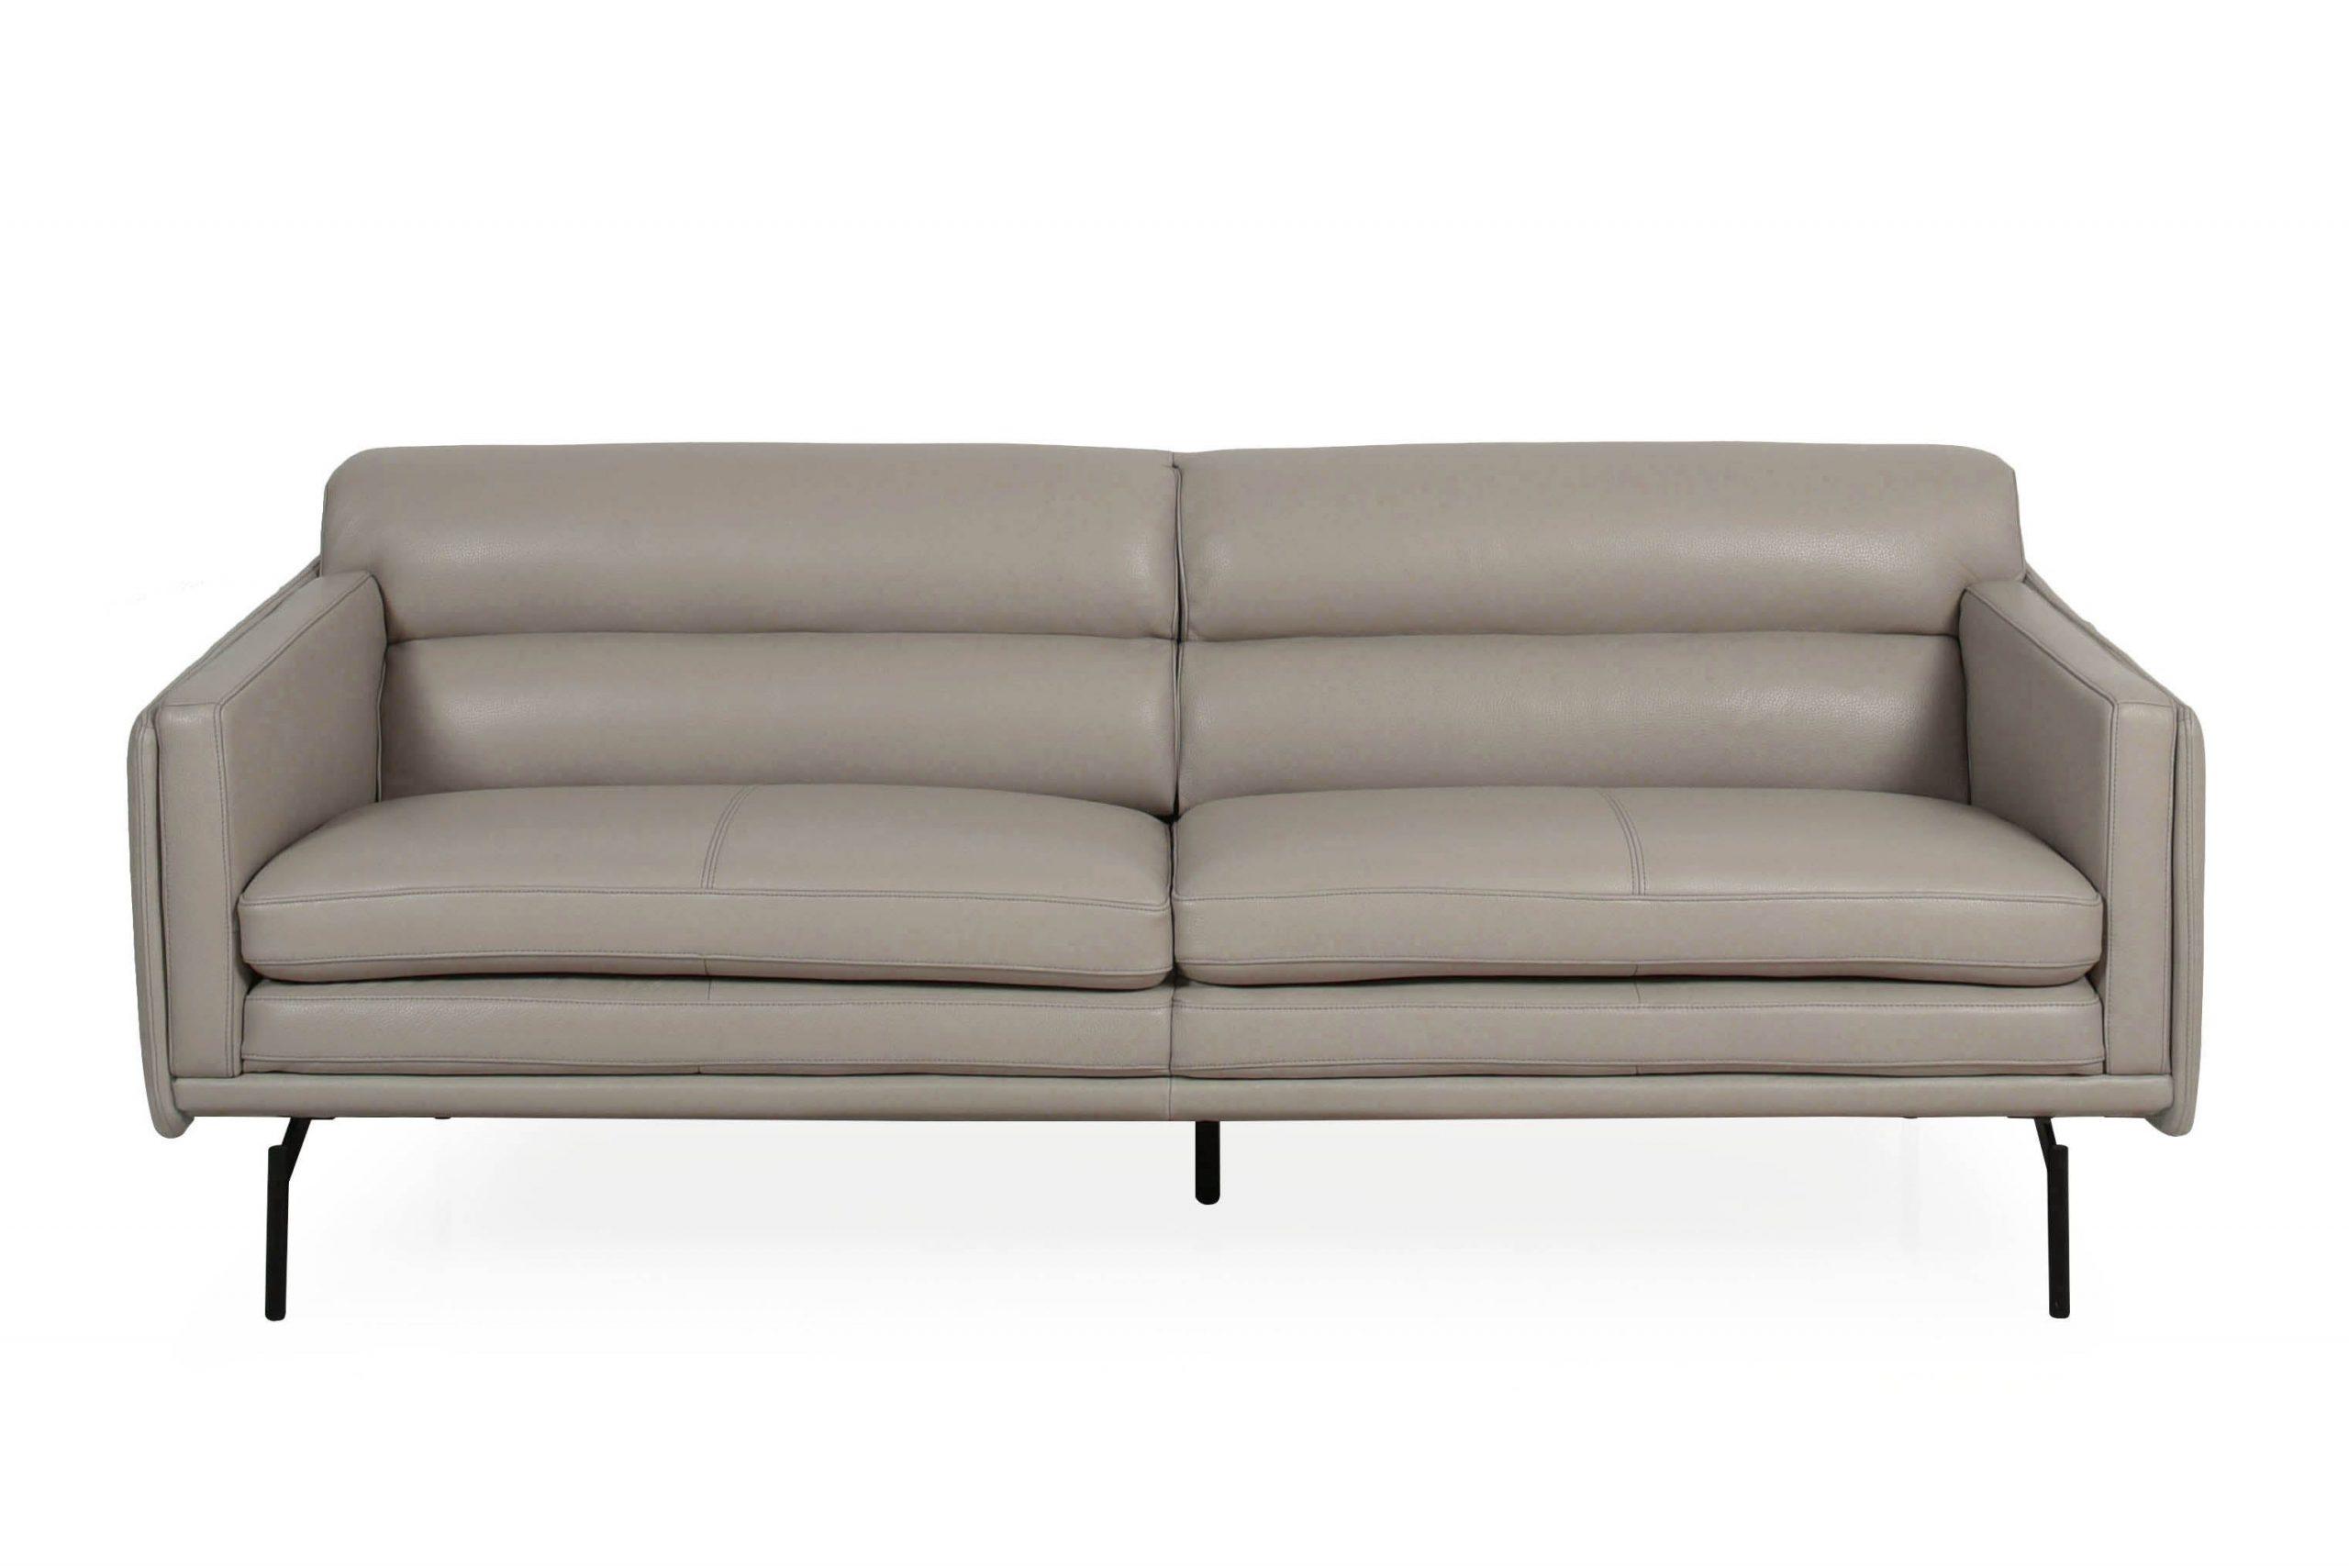 Contemporary, Modern Sofa 442 McCoy 44203BS1383 in Light Gray Full Leather